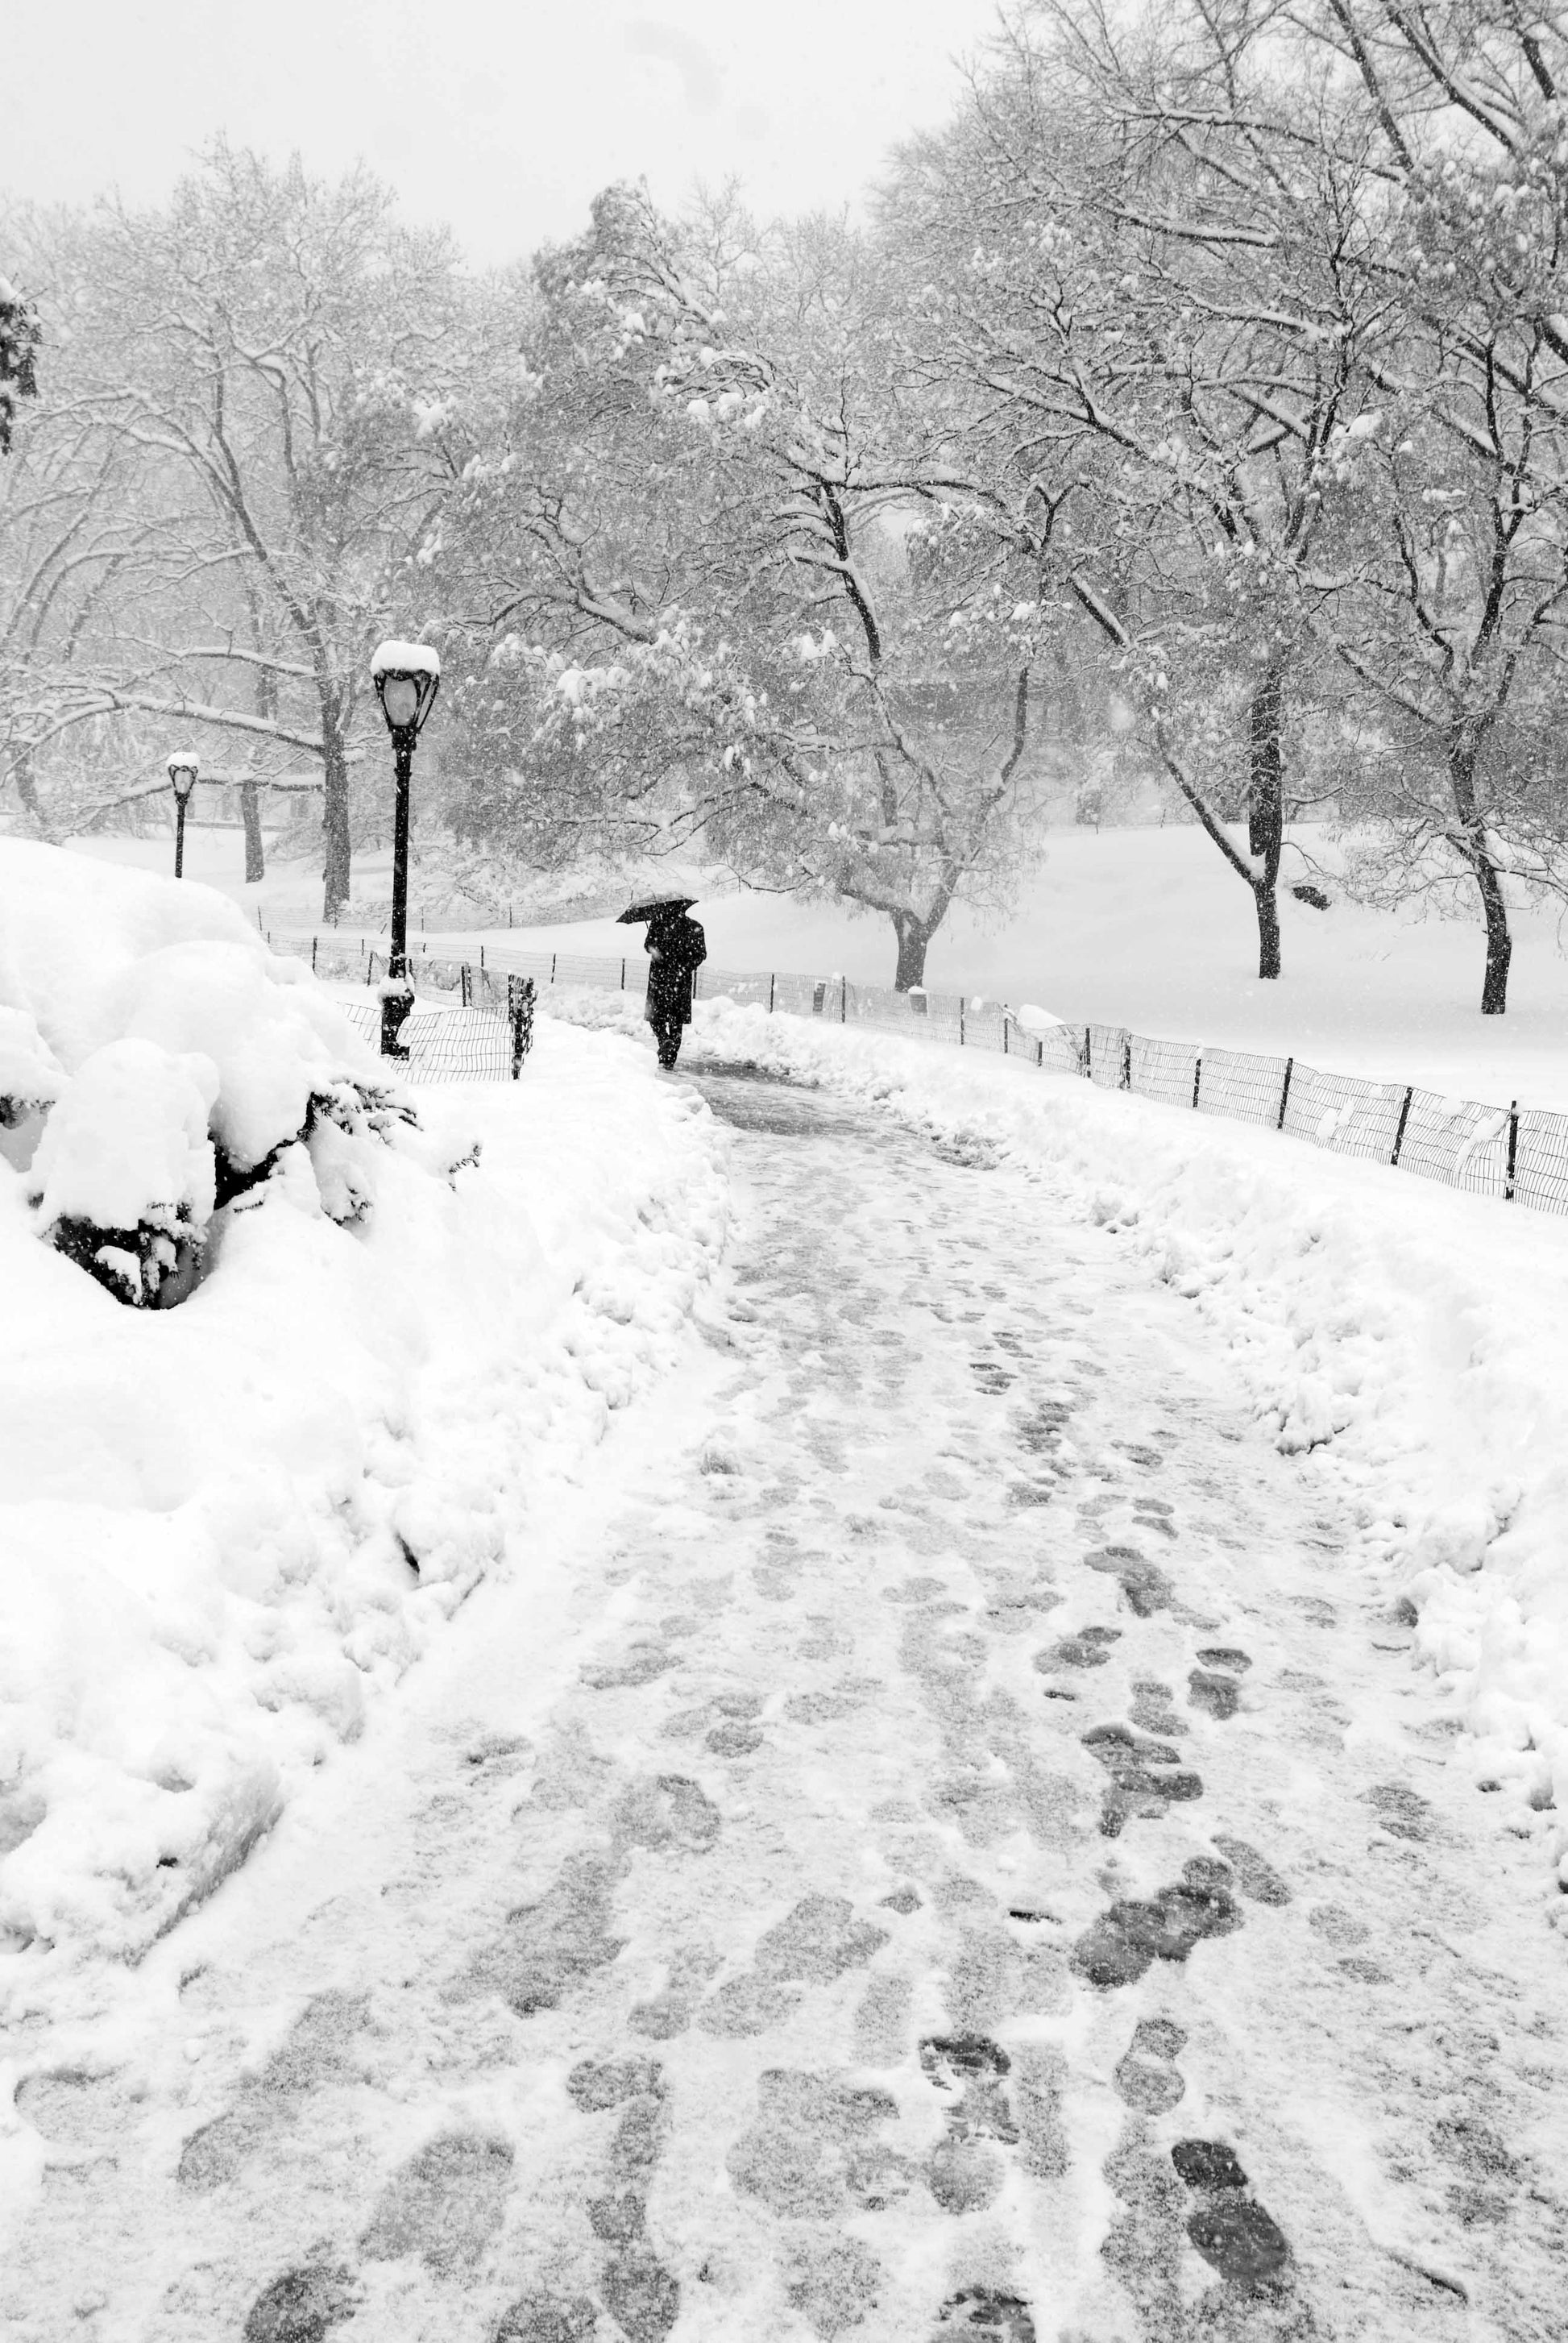 Alessandra Mattanza | GOING FORWARD, Central Park, New York. Braving the winter snows in New Yorks Central Park. Available as an art print or as a photographic print on acrylic glass.